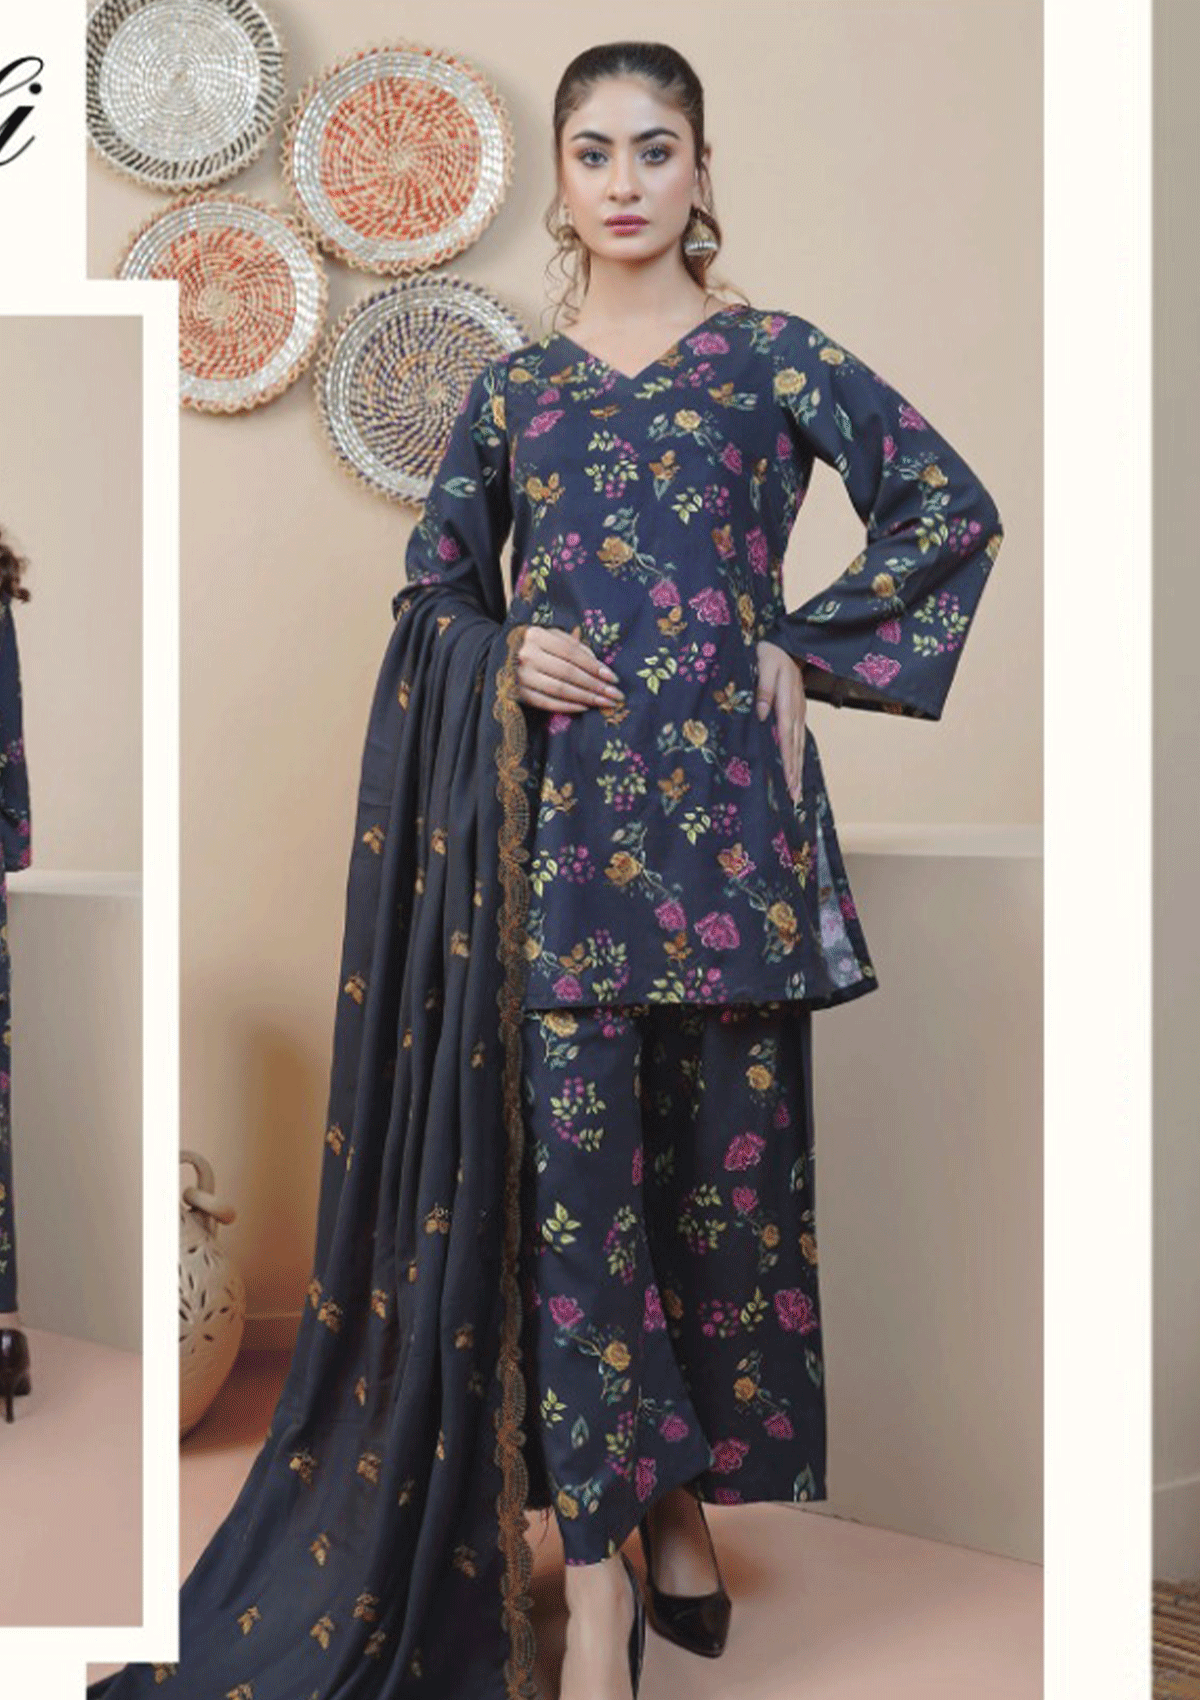 Winter Collection - Rangoli - Embroidered - REL#3 available at Saleem Fabrics Traditions